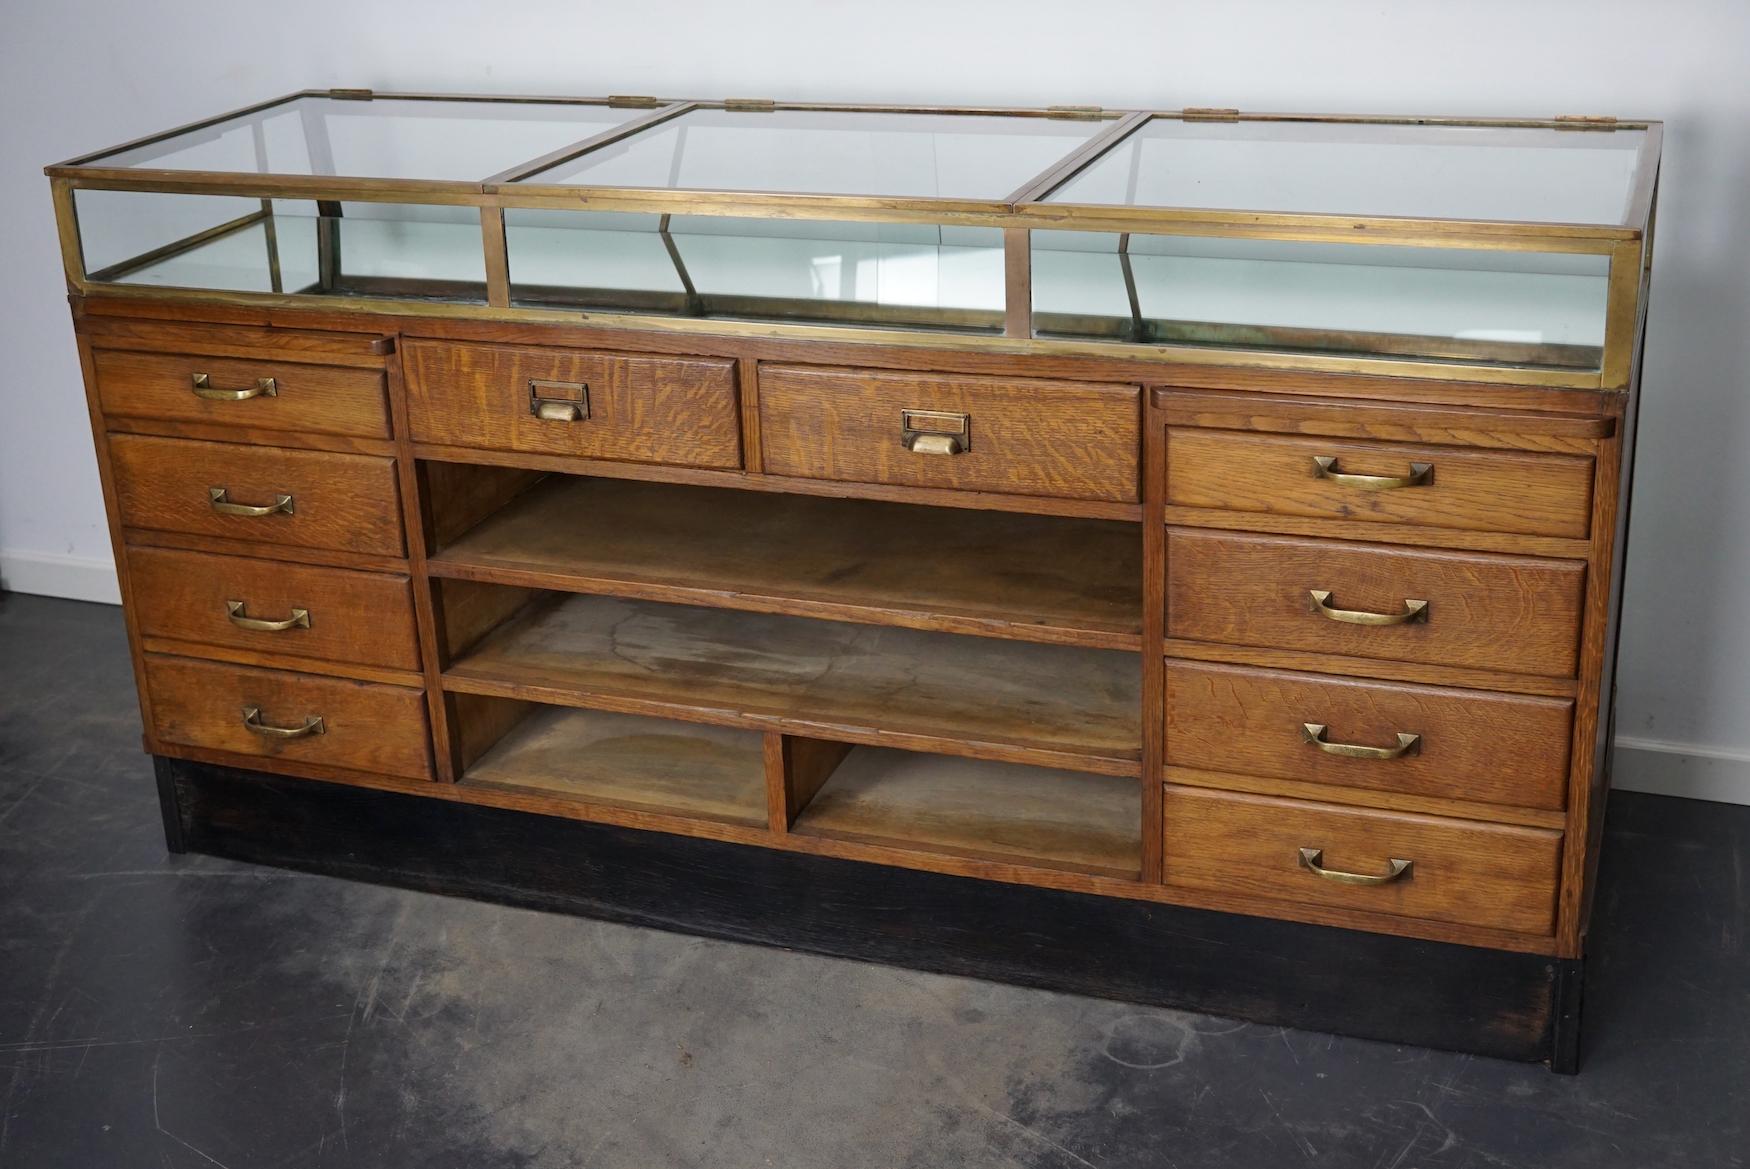 This vintage oak haberdashery shop counter dates from the 1920/30s and was made in France. It features a brass frame, glass doors / shelves and drawers in oak with brass handles. It was most likely used in a jewelry store.